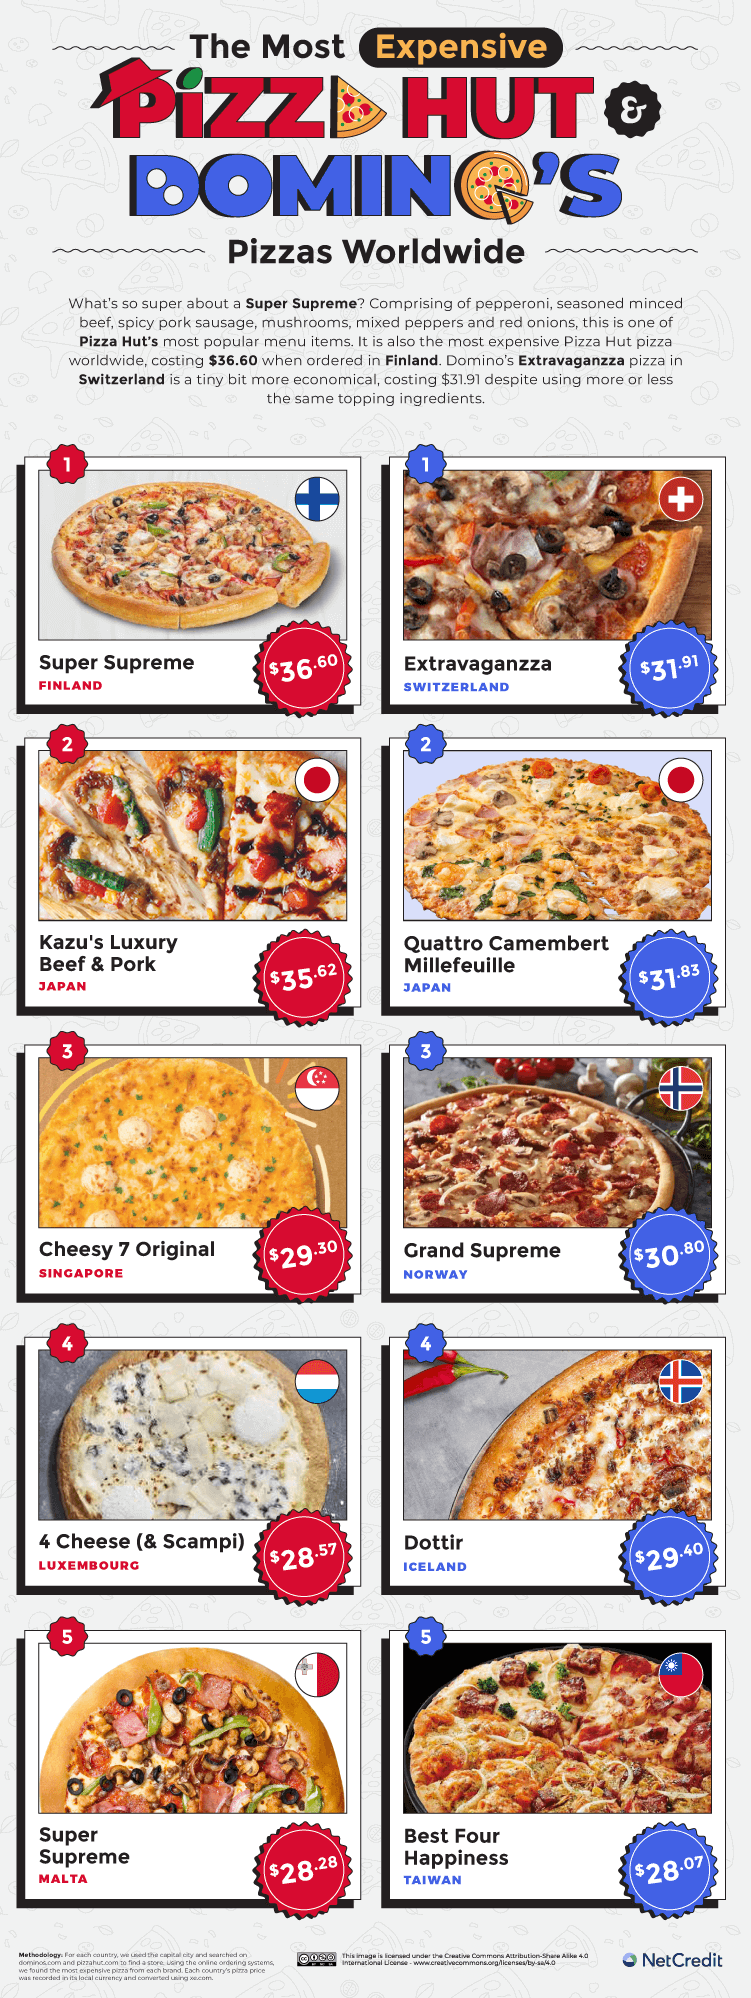 The Price of Pizza Huts and Dominos Most Expensive